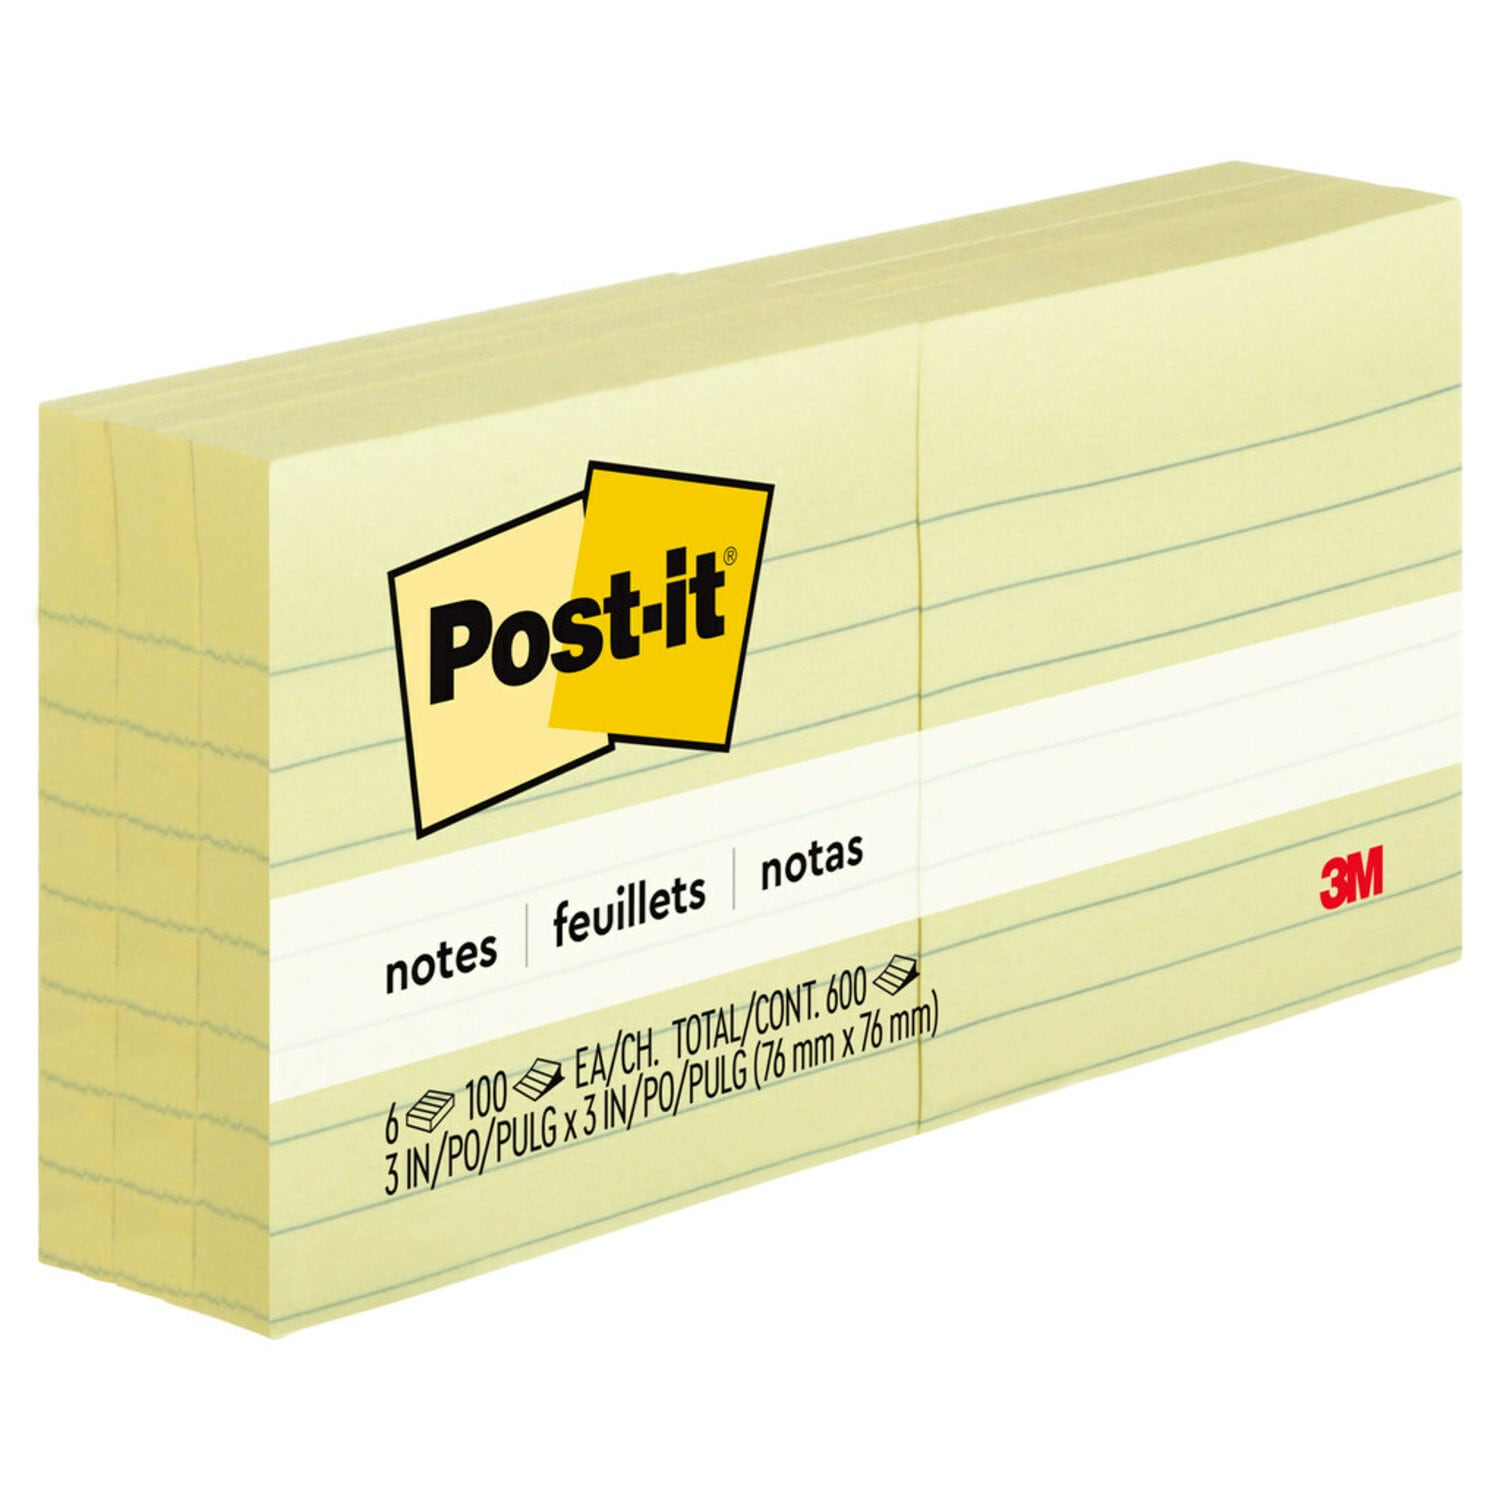 7100243062 - Post-it Notes 630-6PK, 3 in x 3 in (76 mm x 76 mm)